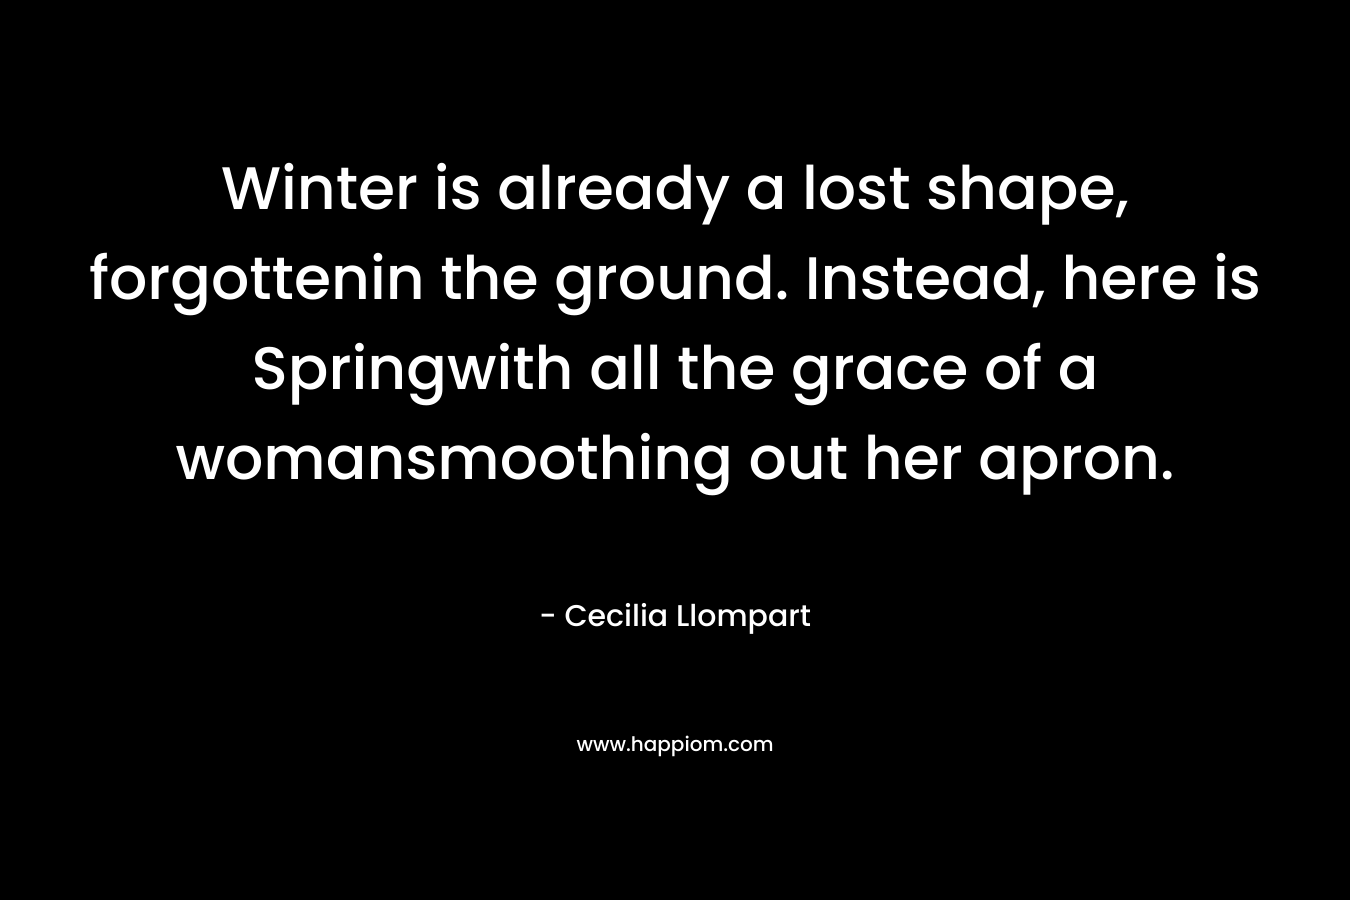 Winter is already a lost shape, forgottenin the ground. Instead, here is Springwith all the grace of a womansmoothing out her apron. – Cecilia Llompart